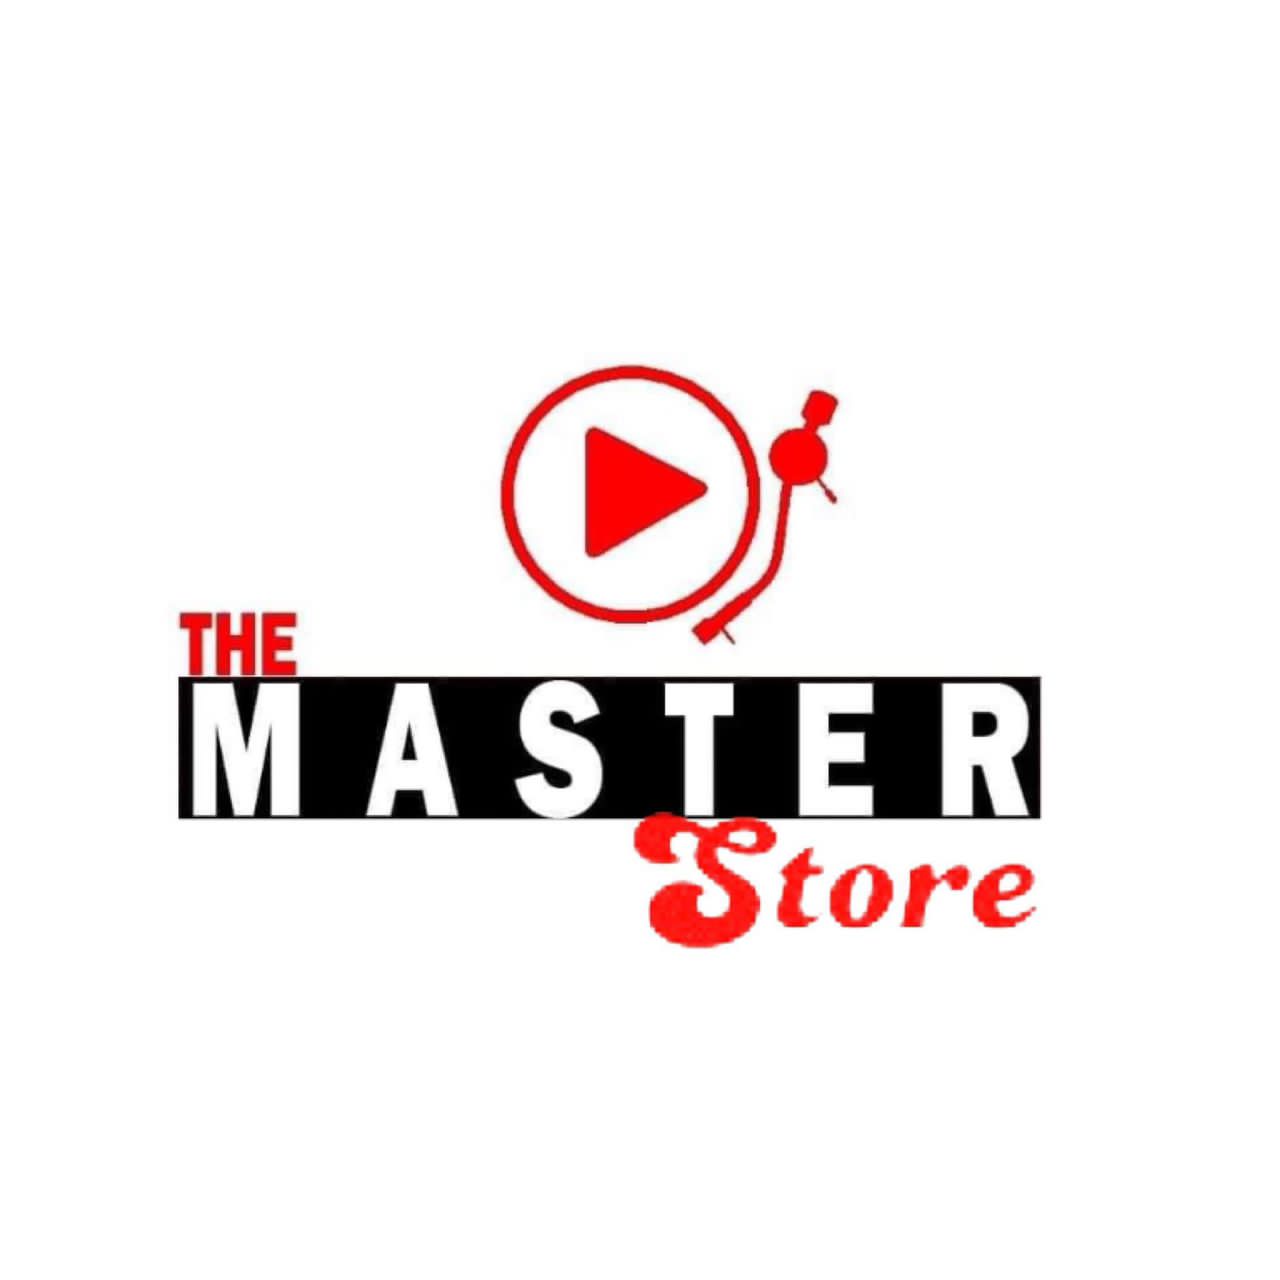 THE MASTER STORE TZ